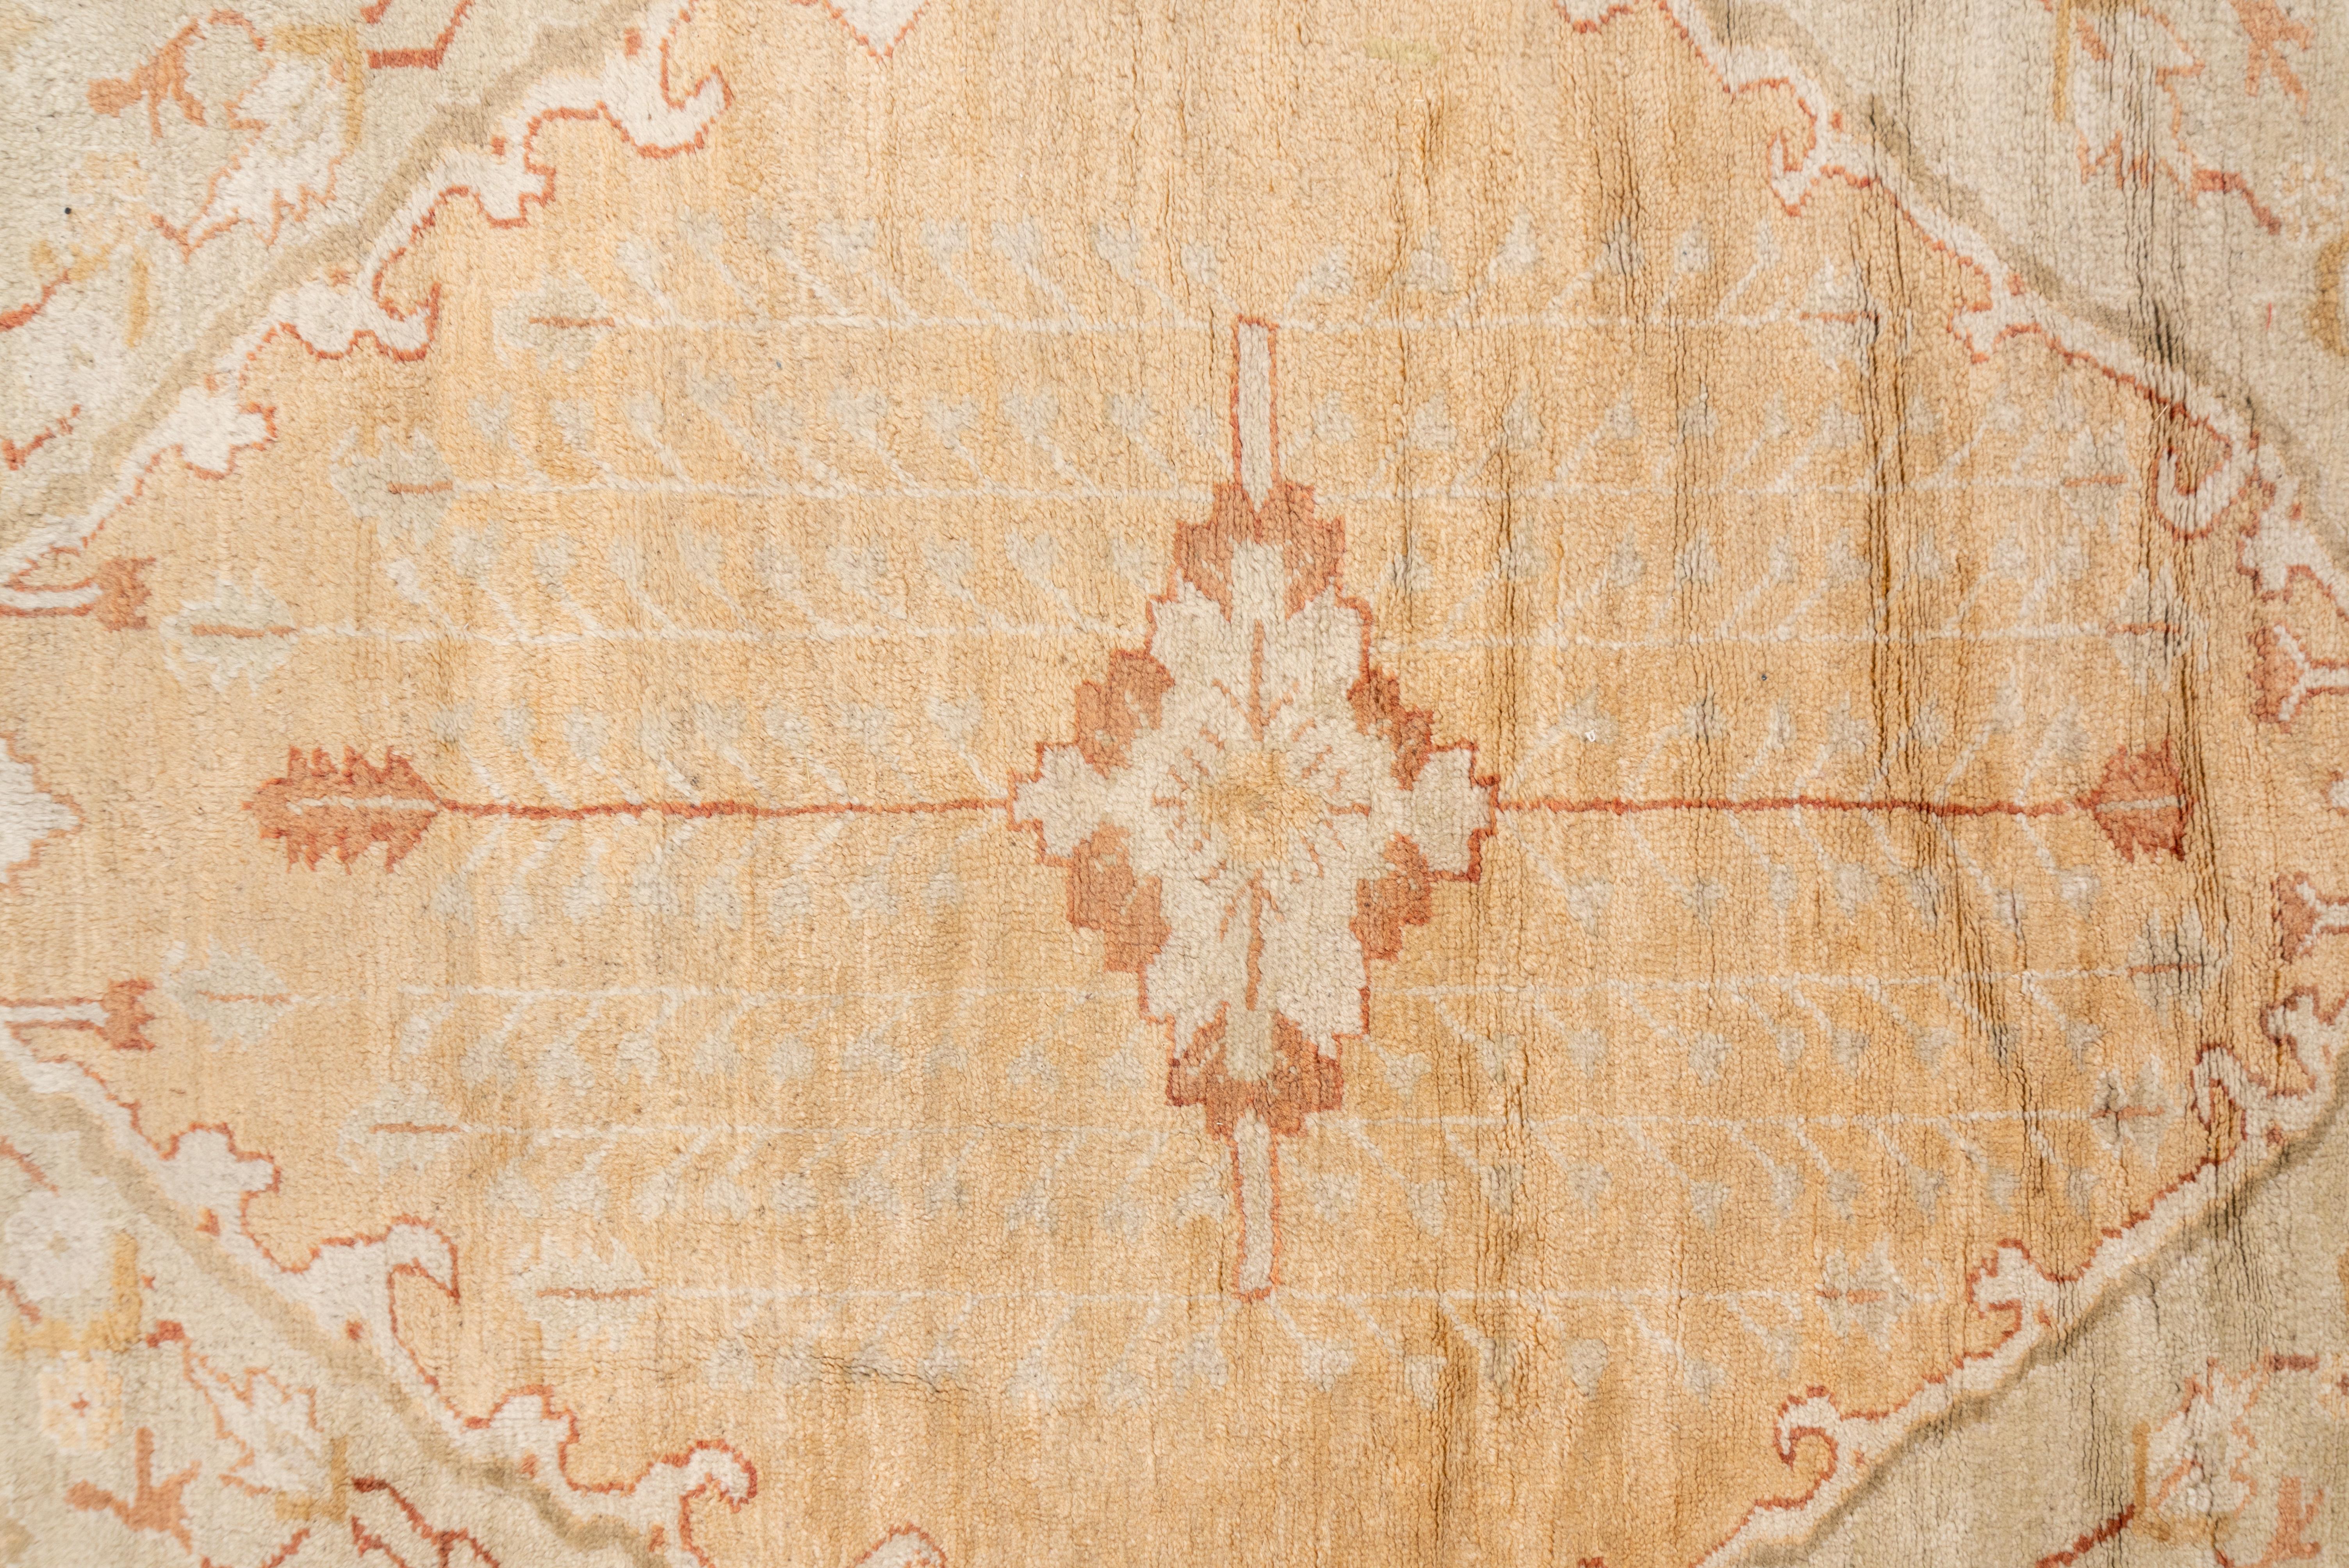 Fine Antique Oushak Carpet, Seafoam Allover Field, Gold Borders, Orange Accents In Good Condition For Sale In New York, NY